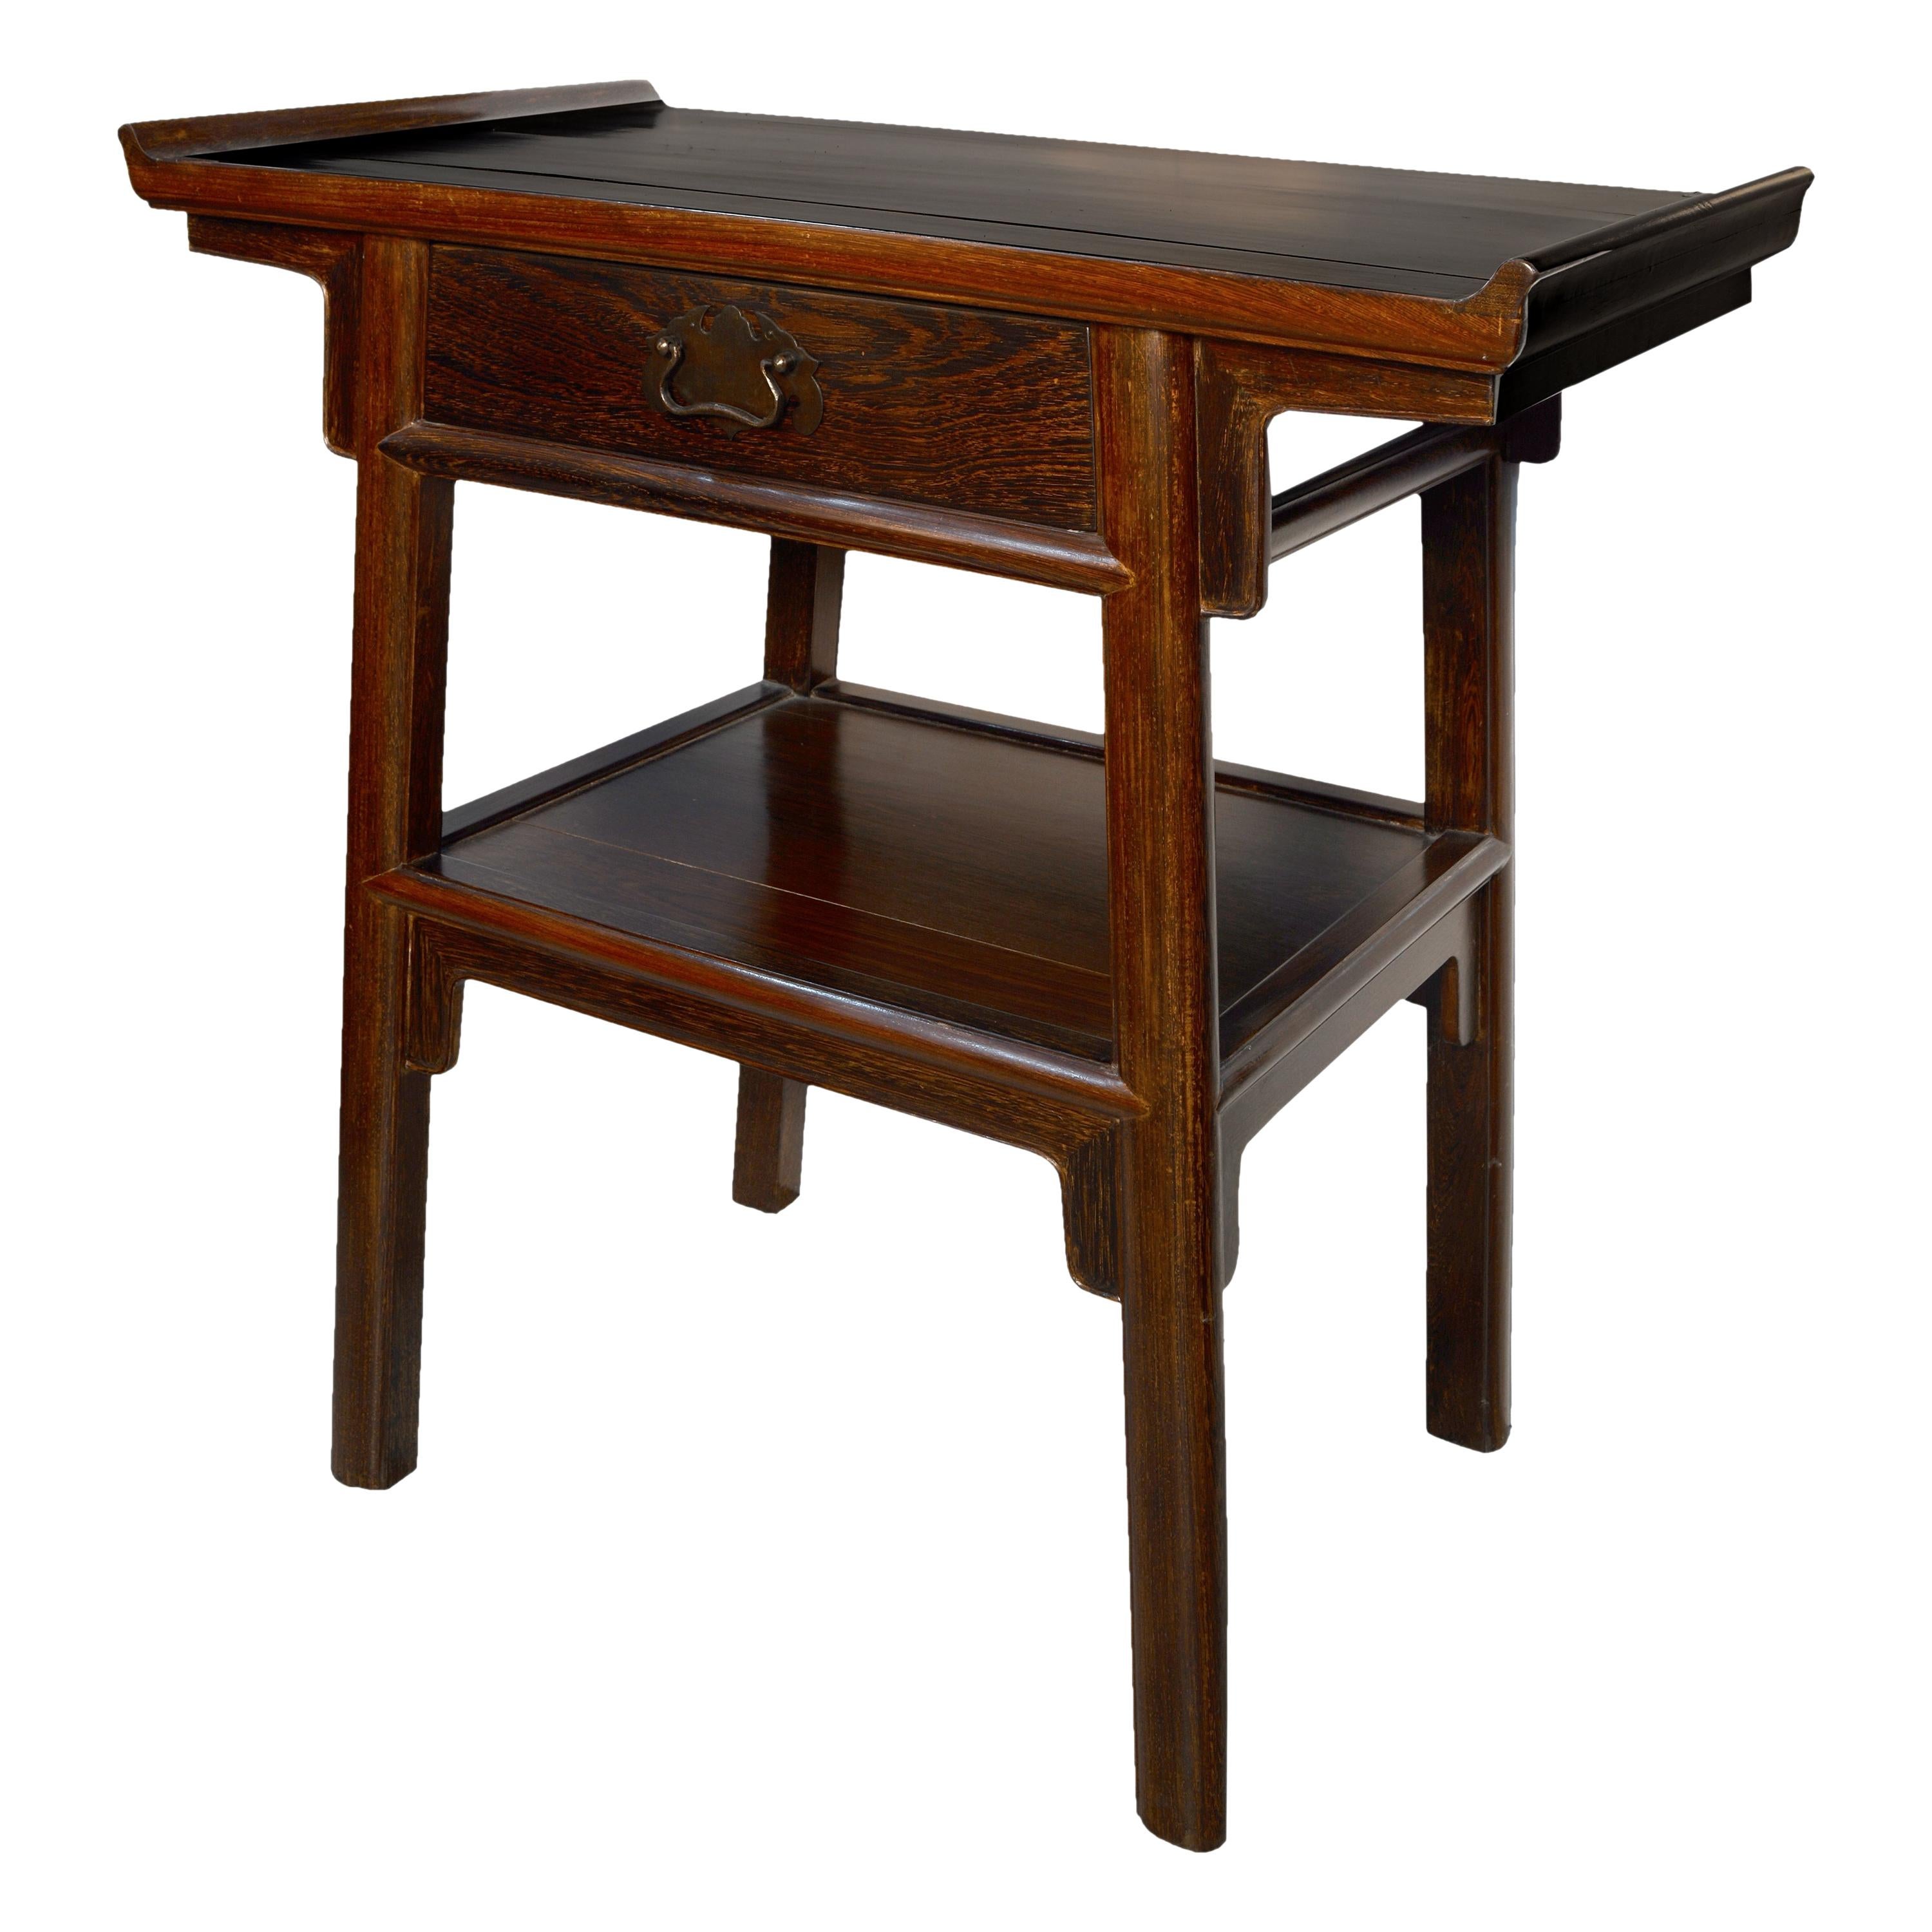 Oriental Table, Wood and Metal, 20th Century